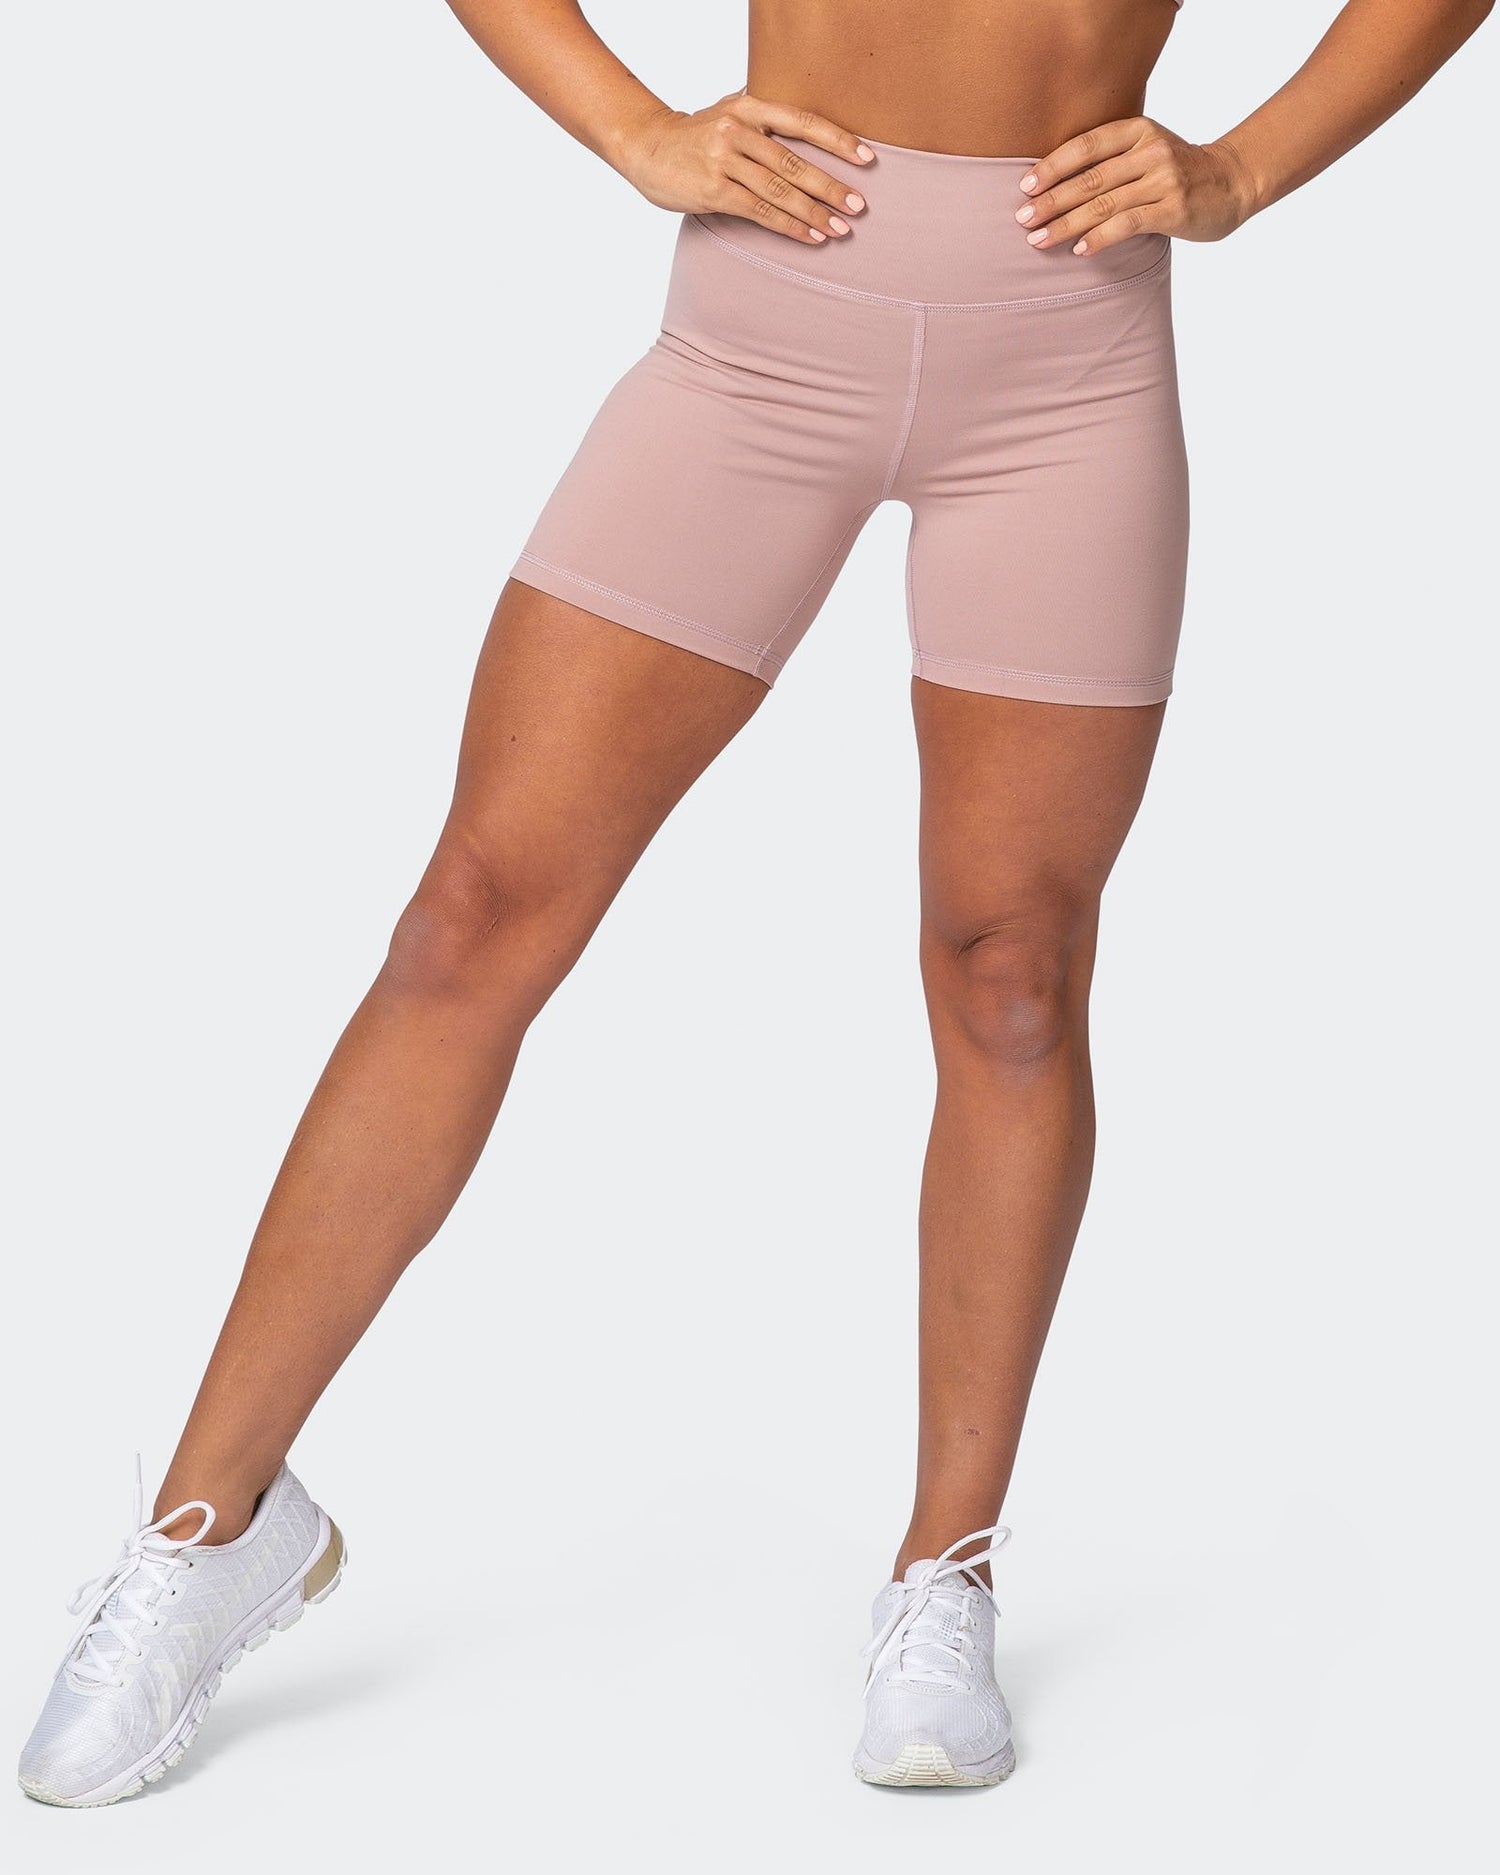 Prize Fighter Bike Shorts - Fawn W/ White & Wine